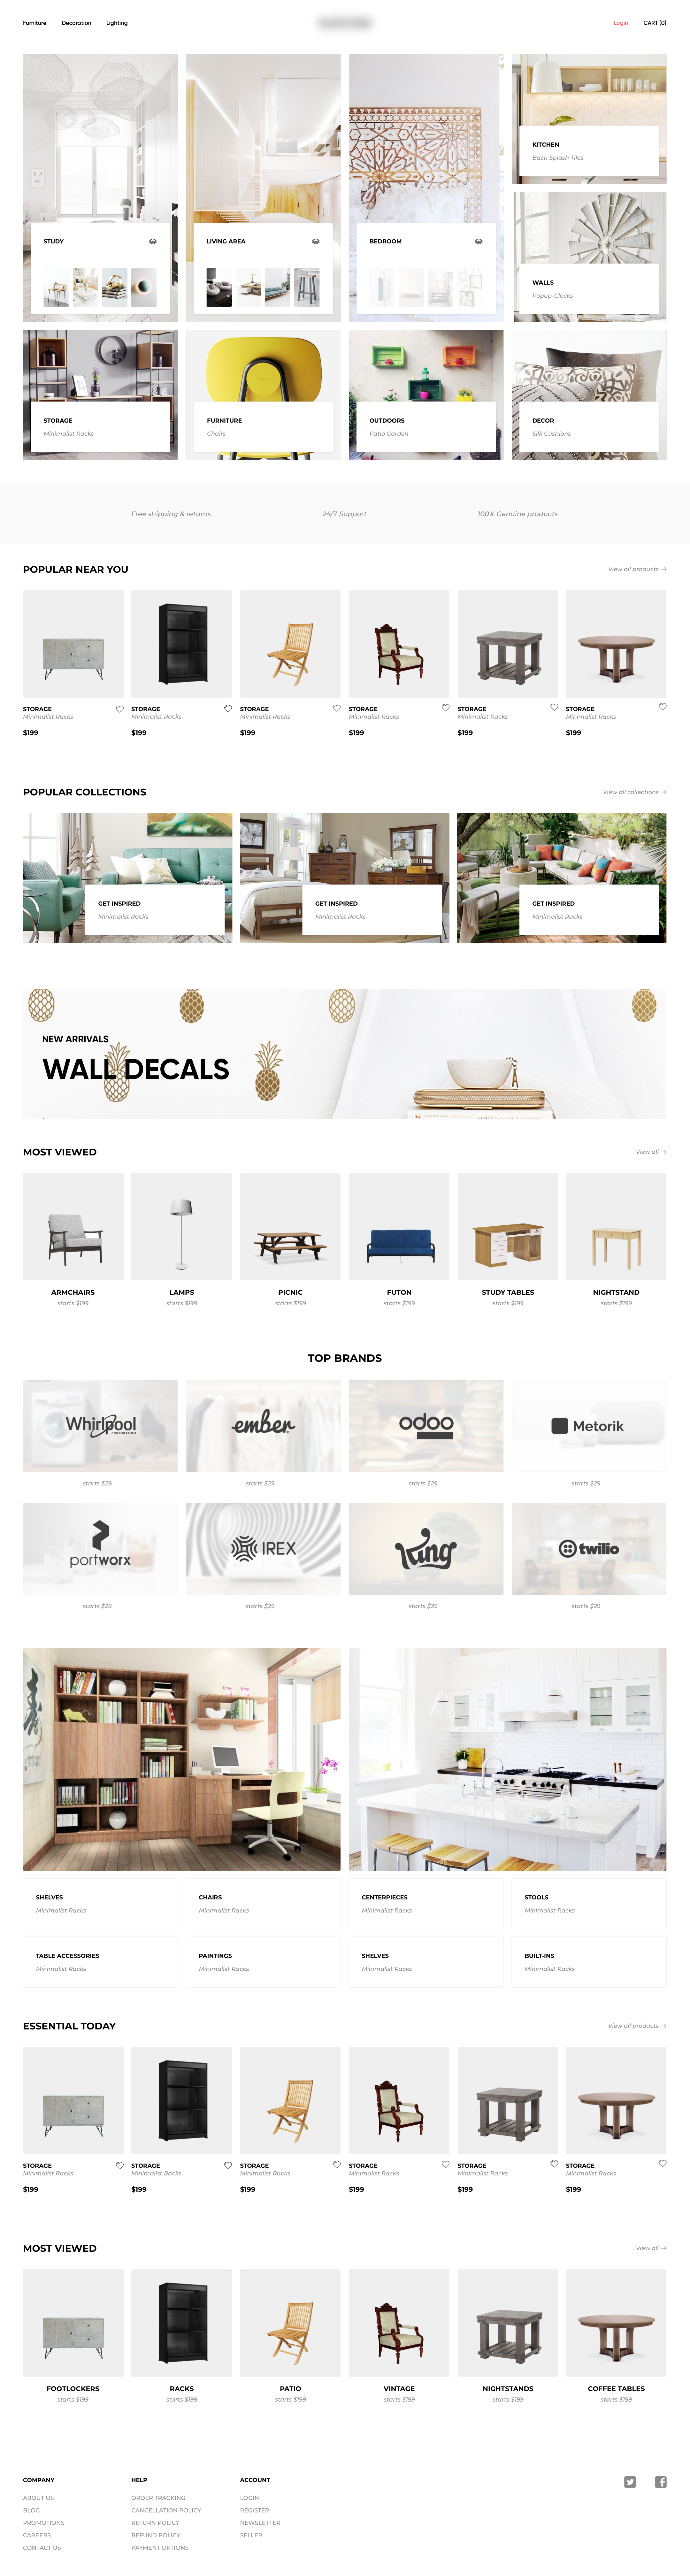 Home Decor and Furnishing Website by Rajat Mehra on Dribbble